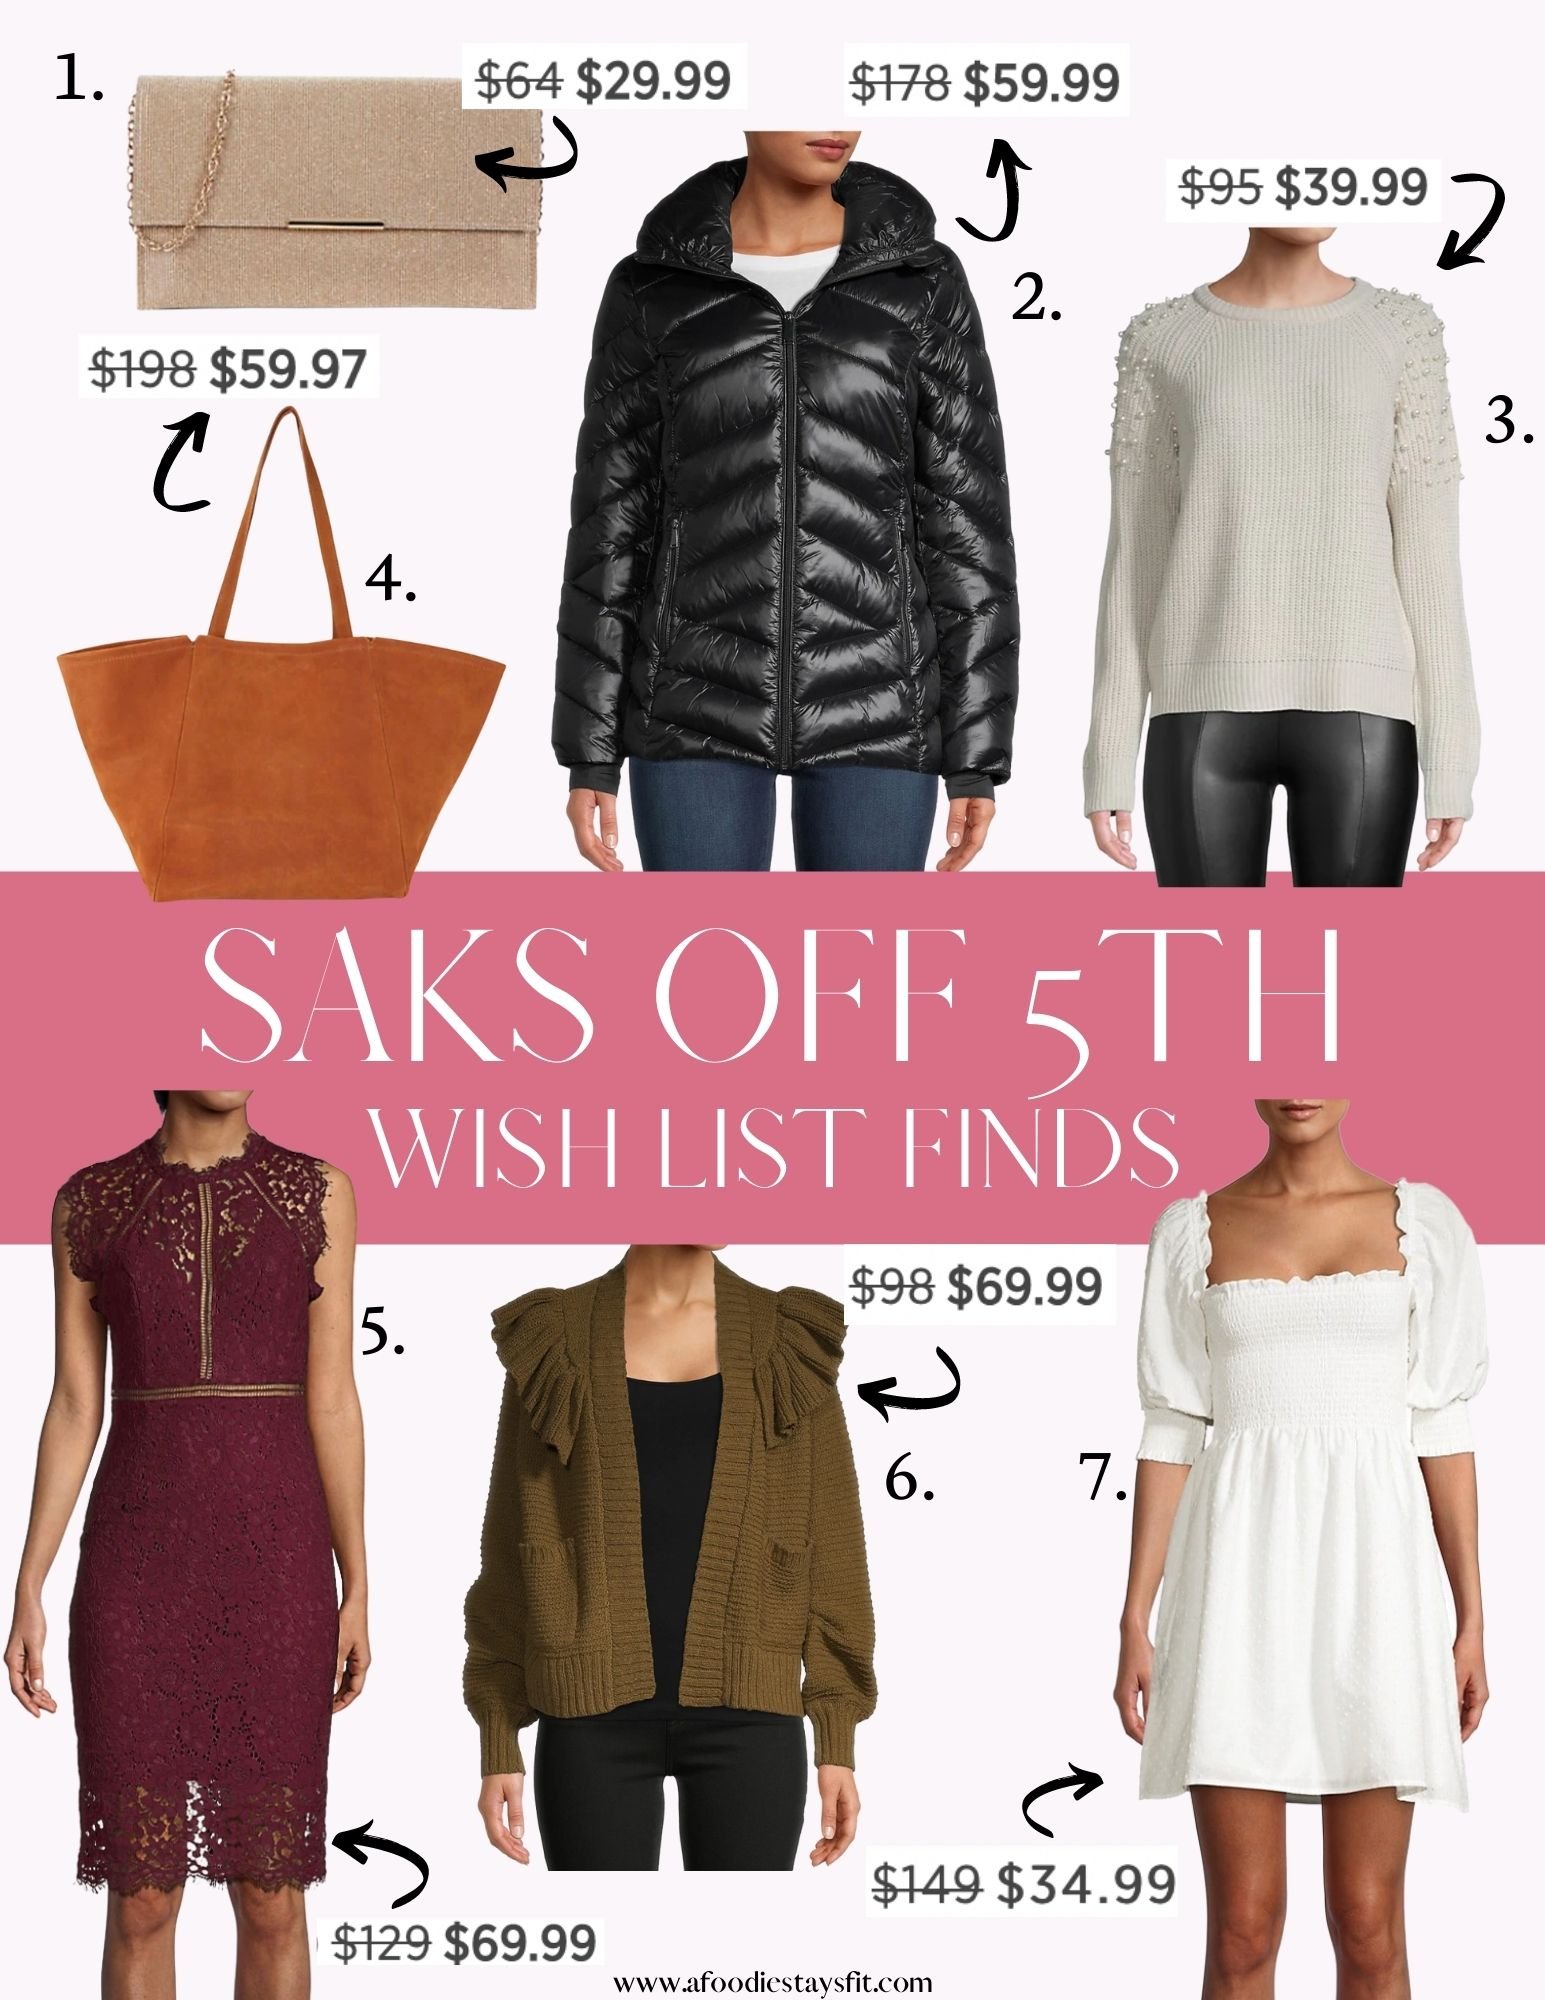 Gifts from Saks Off 5th - 2022 Gift Guides